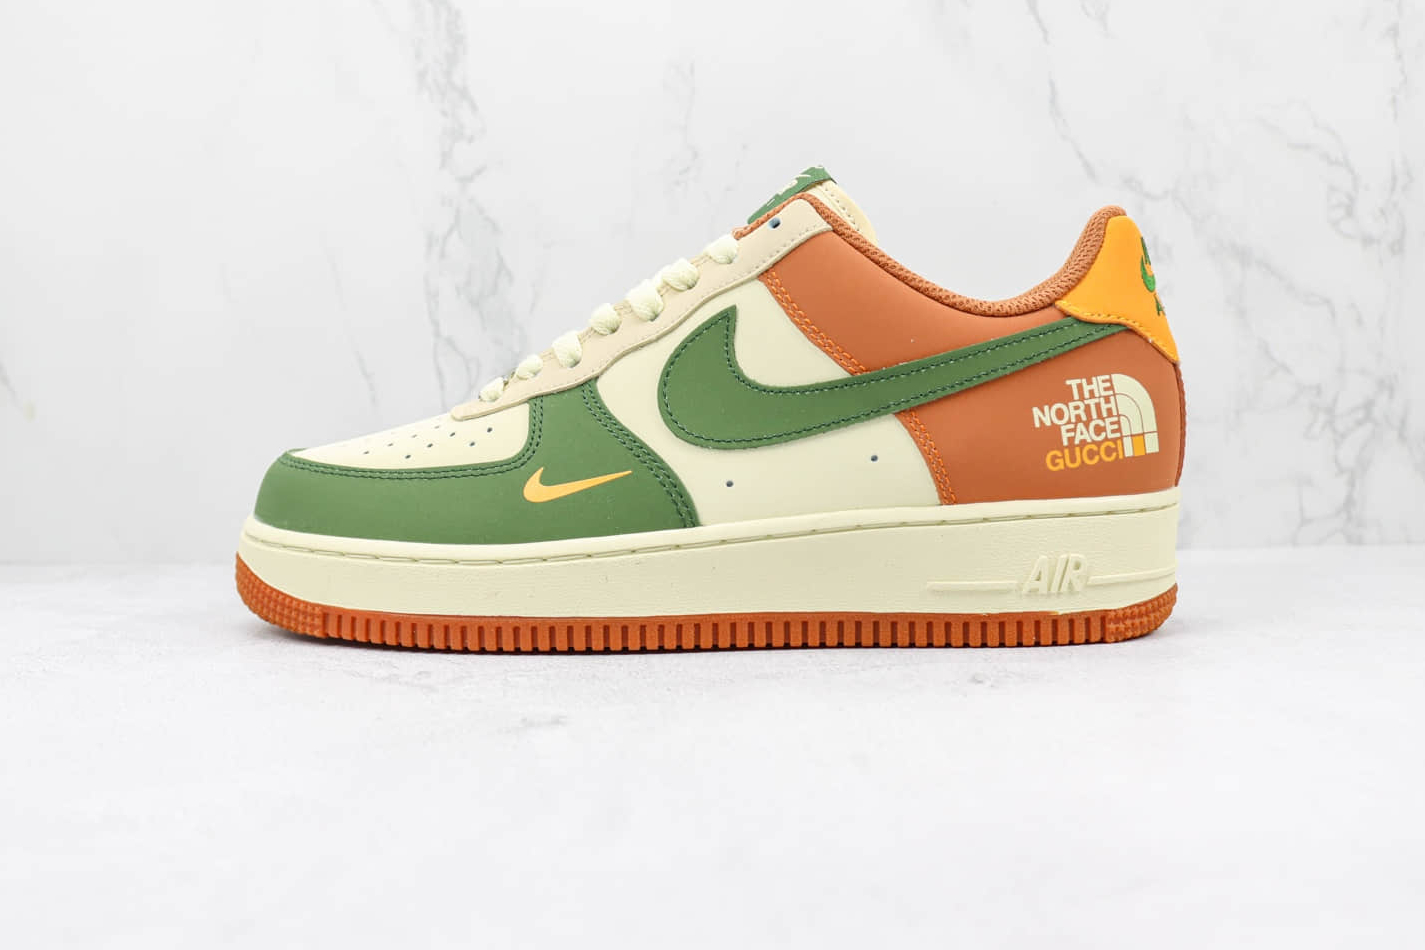 TheNorthFace x Nike Air Force 1 07 Low Orange Green Yellow BS9055-811 - Limited Edition Collaboration